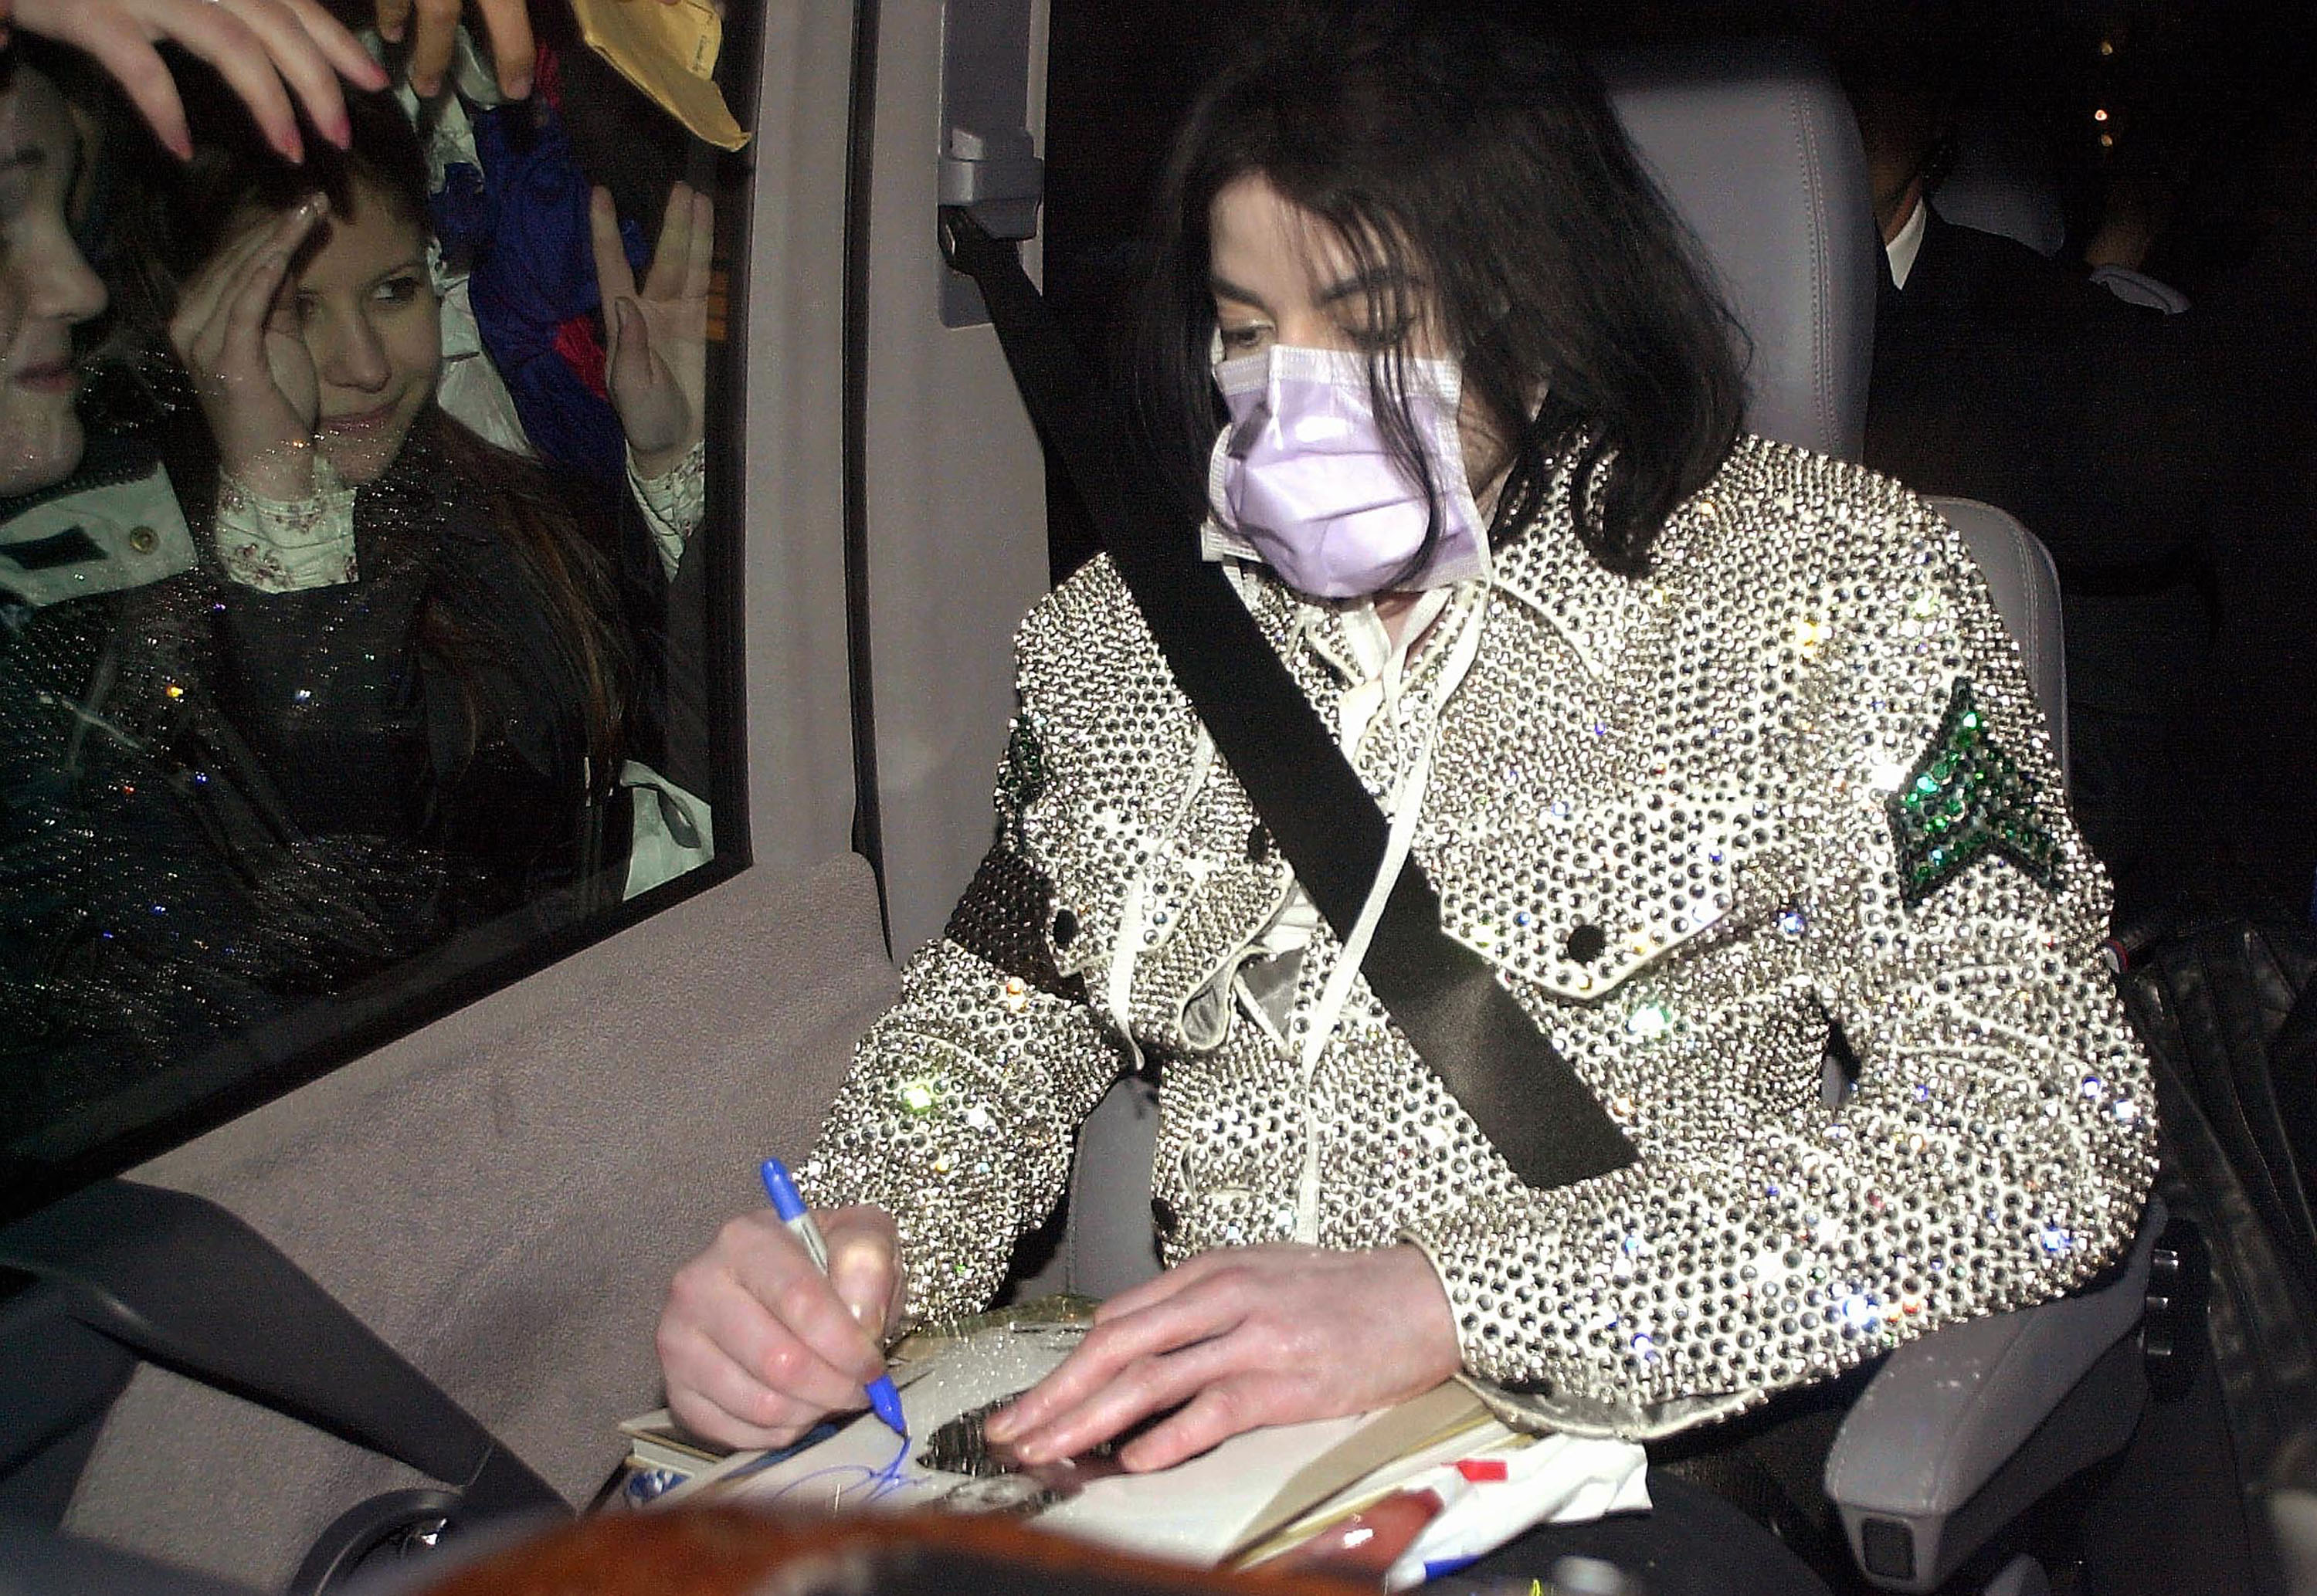 Michael Jackson at the Adlon Hotel in Berlin in 2002 | Source: Getty Images